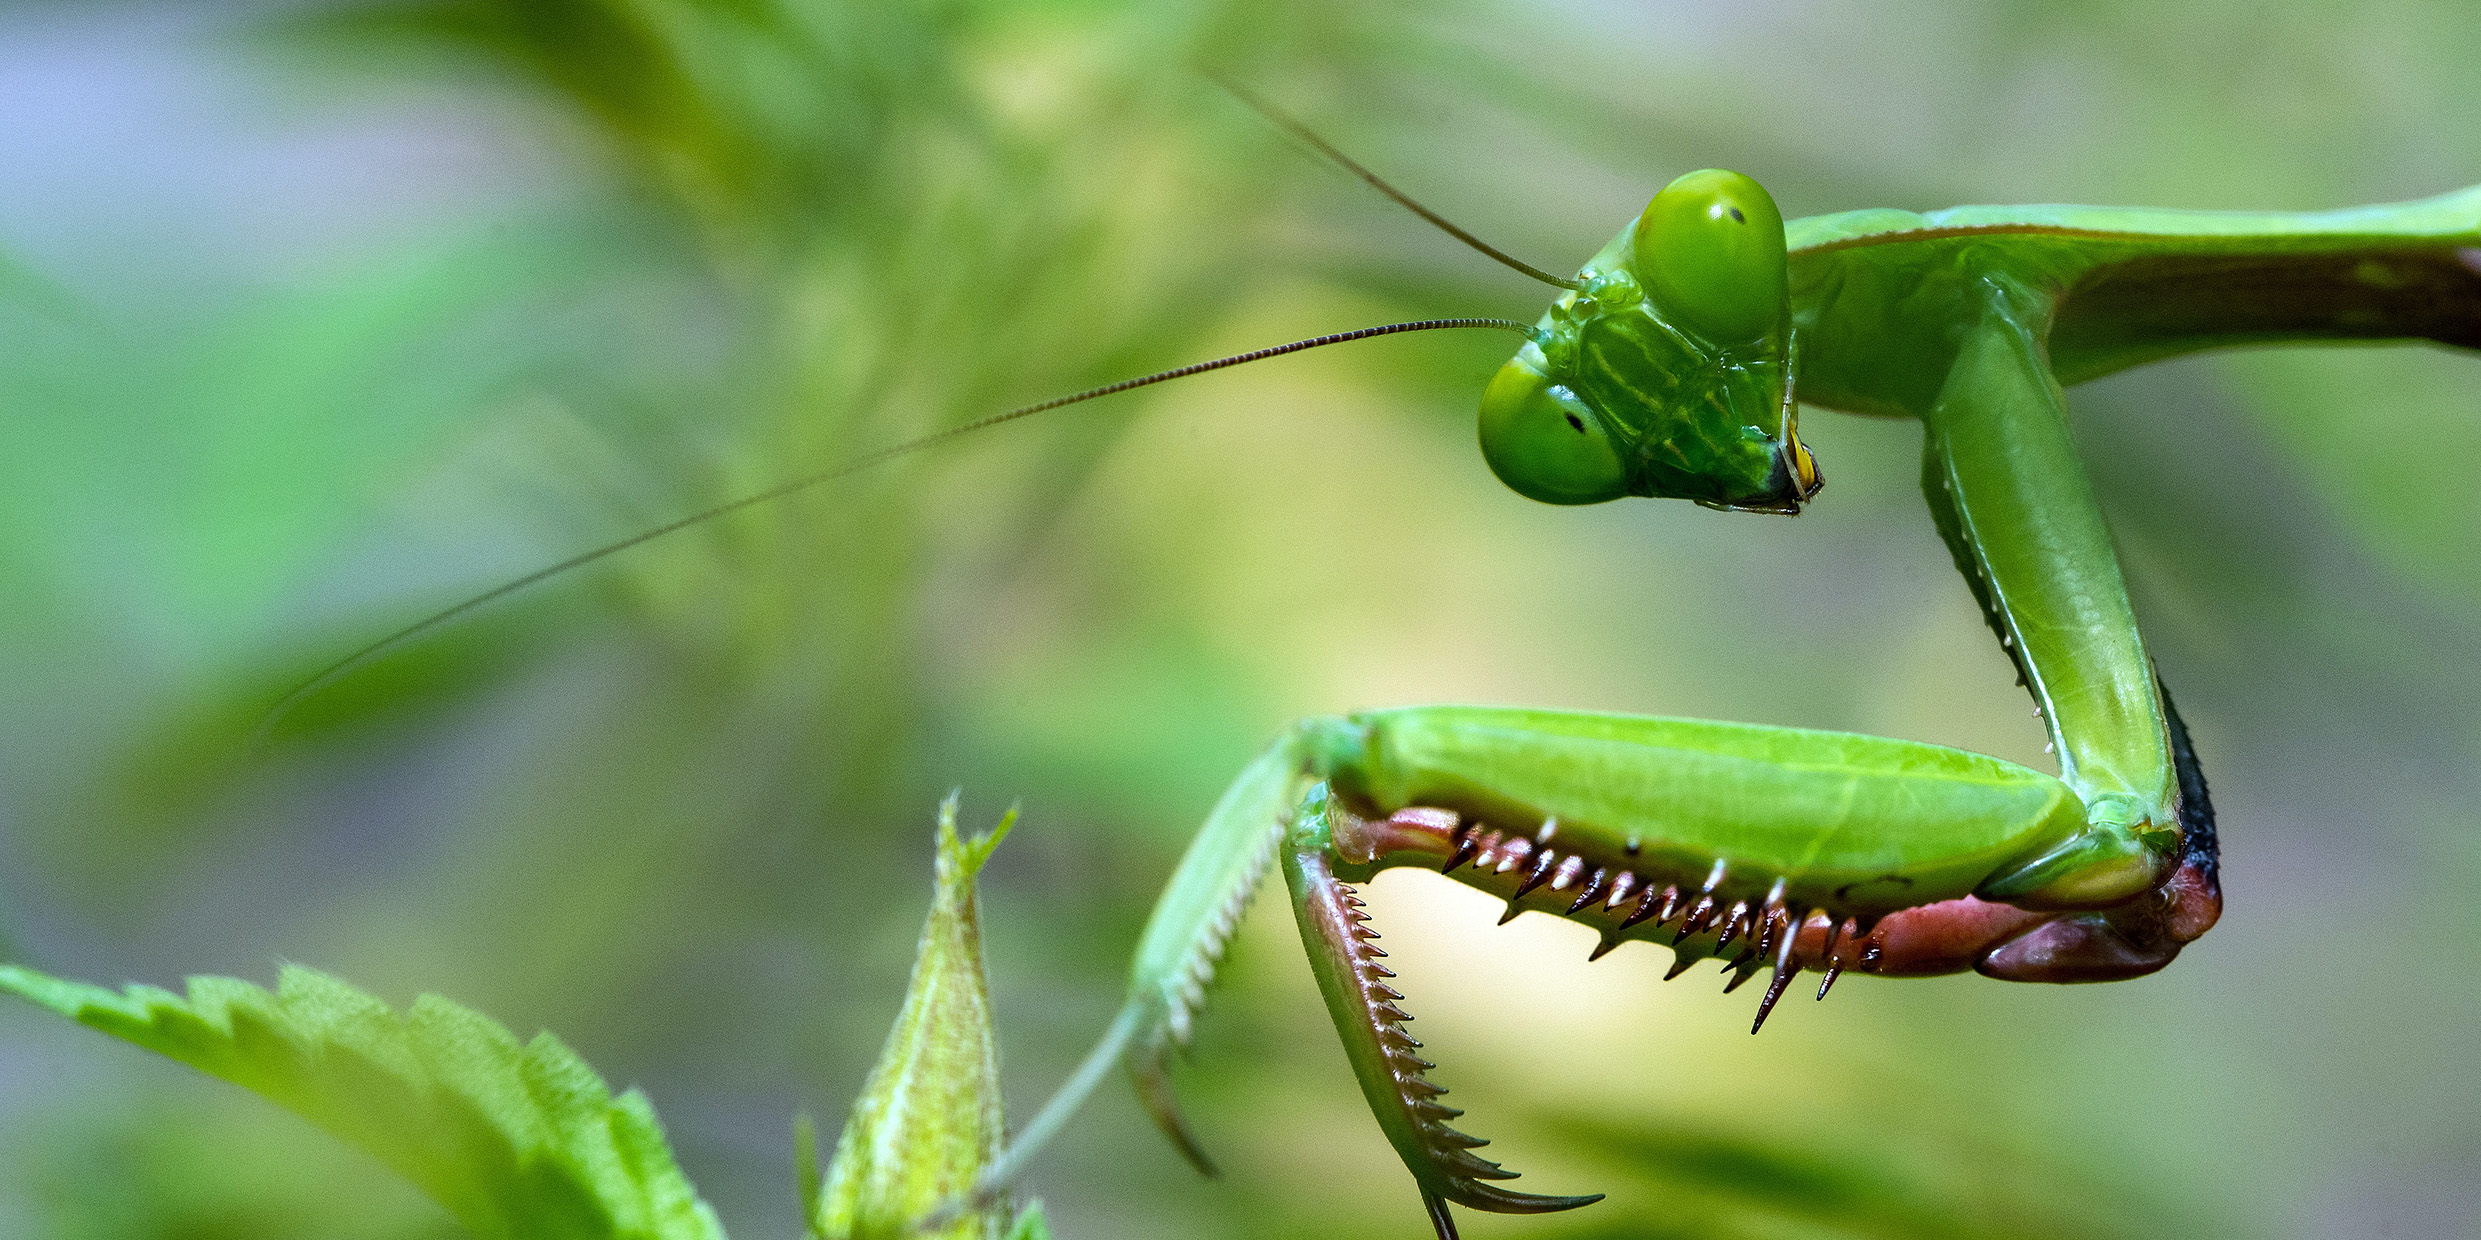 Close-up image of a praying mantis insect